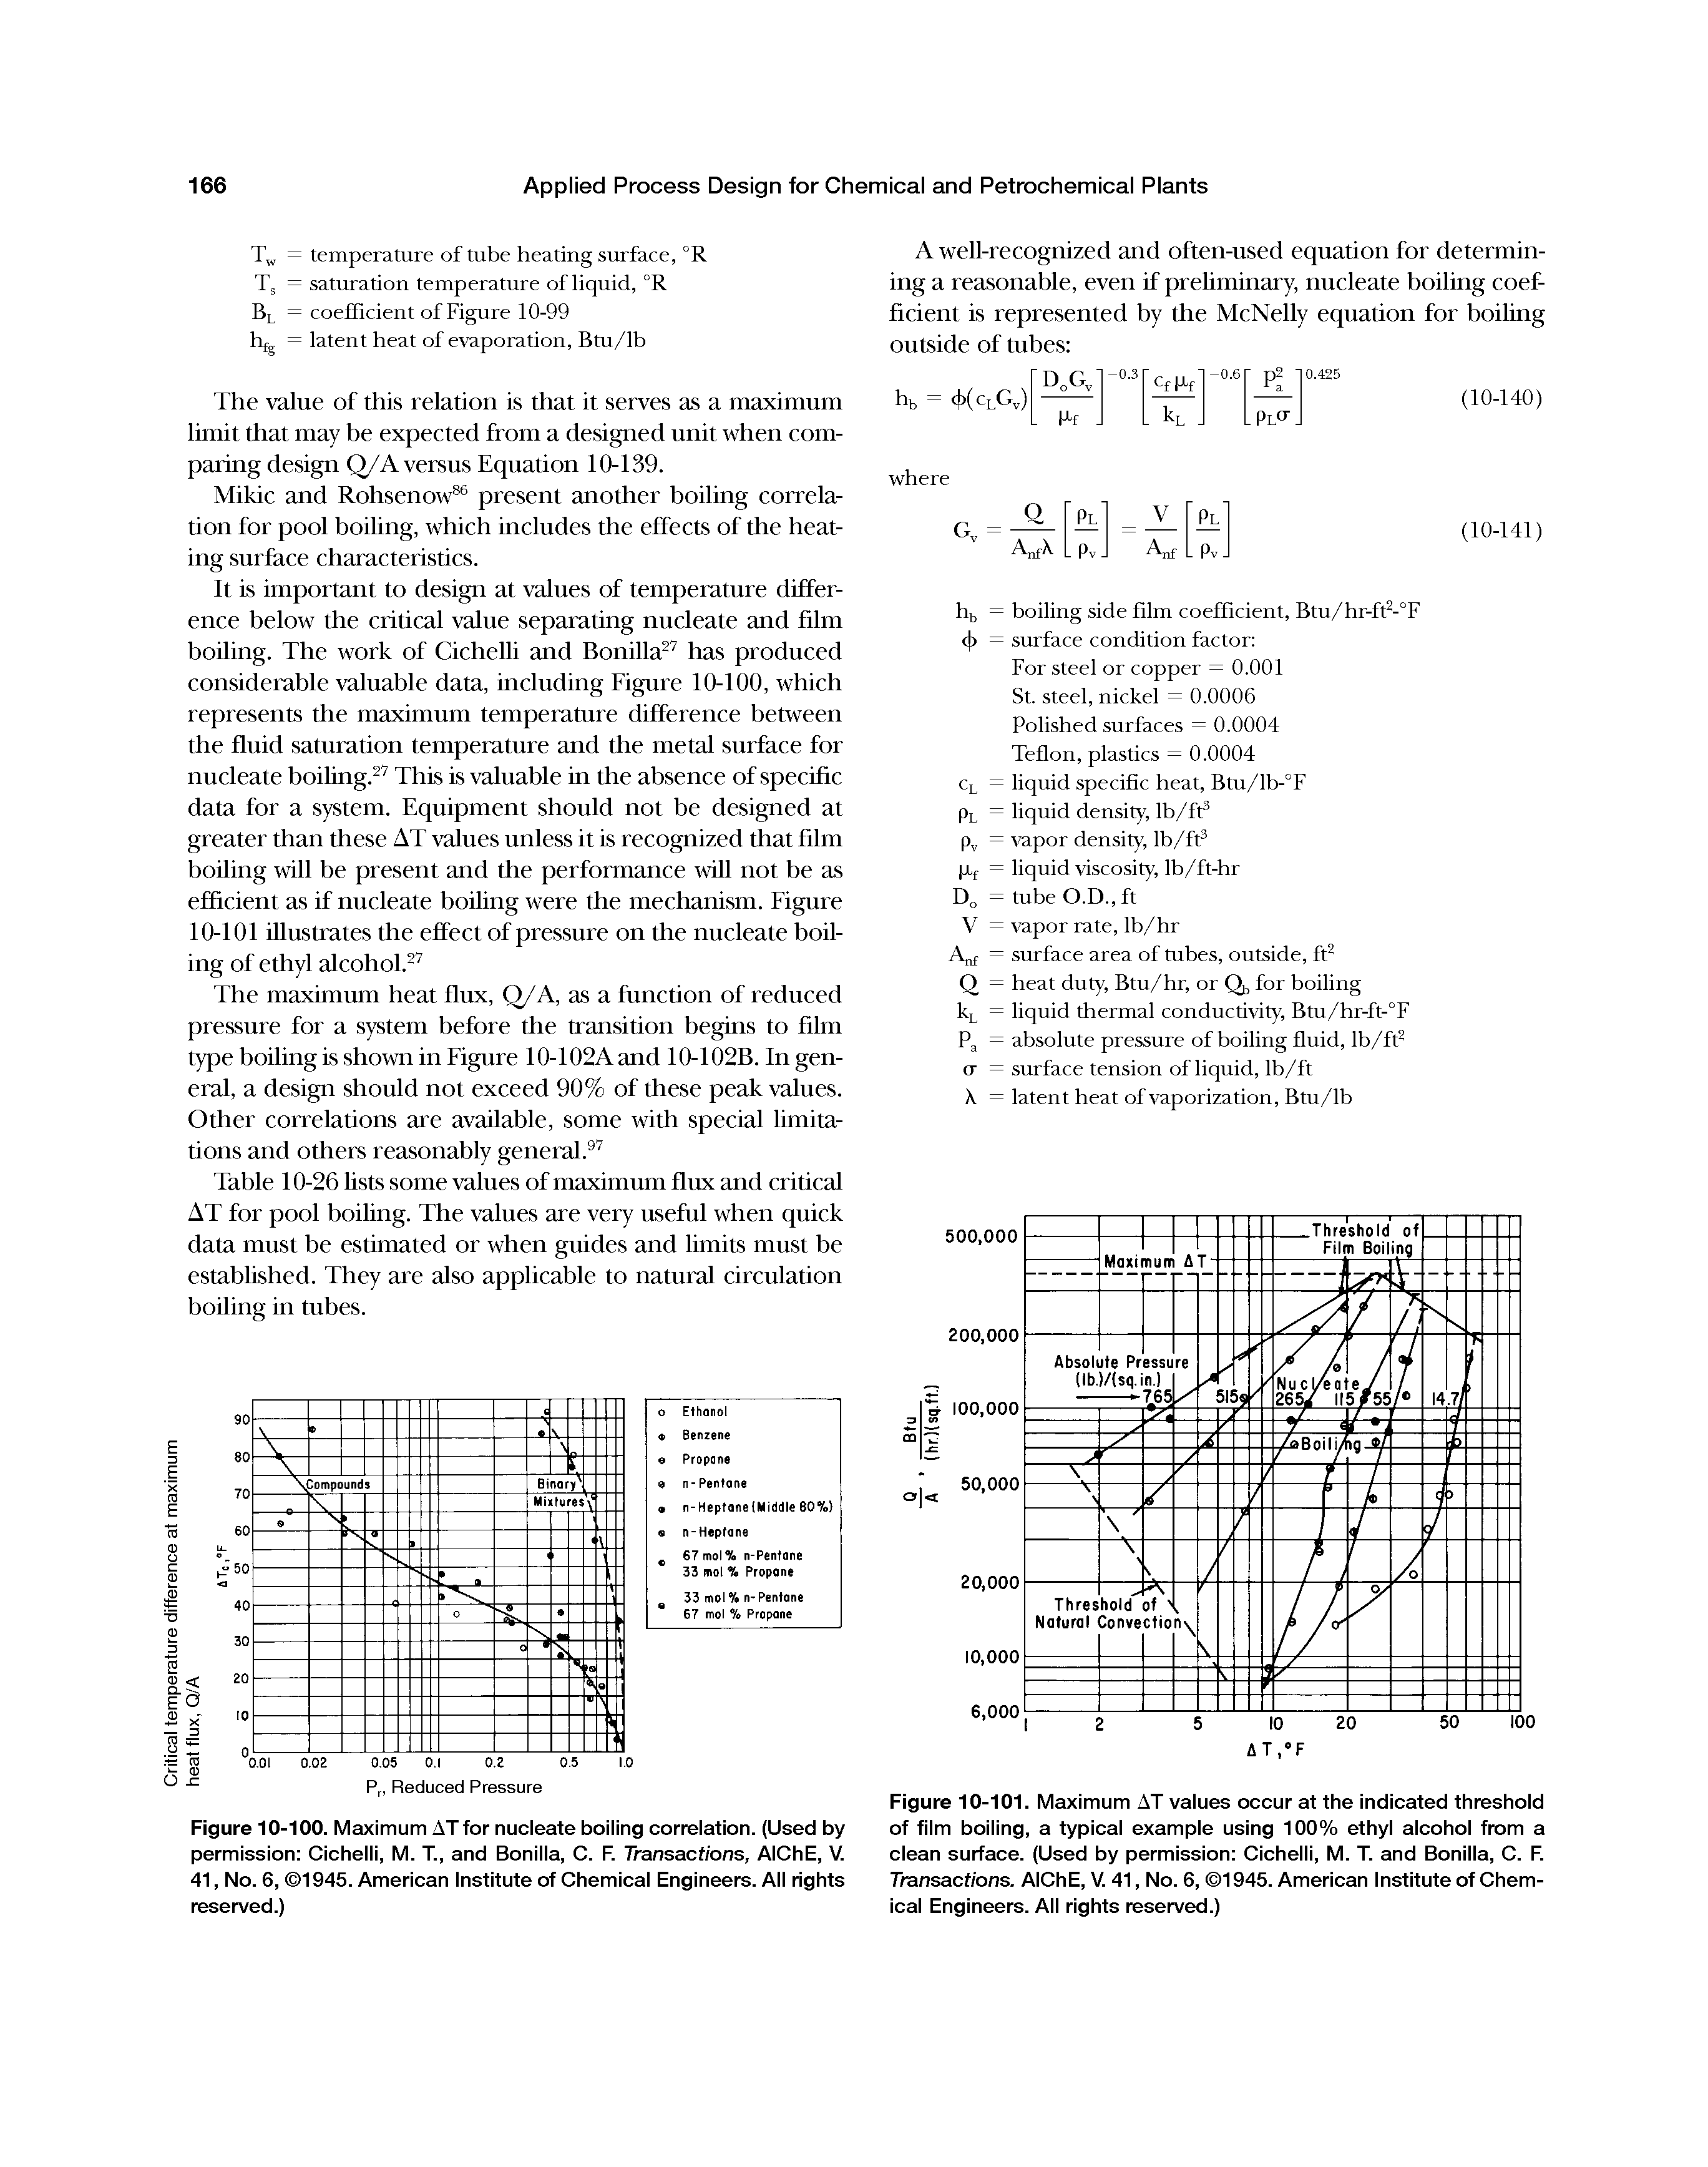 Figure 10-101. Maximum AT values occur at the indicated threshold of film boiling, a typical example using 100% ethyl alcohol from a clean surface. (Used by permission Cichelli, M. T. and Bonilla, C. F. Transactions. AlChE, V. 41, No. 6, 1945. American Institute of Chemical Engineers. All rights reserved.)...